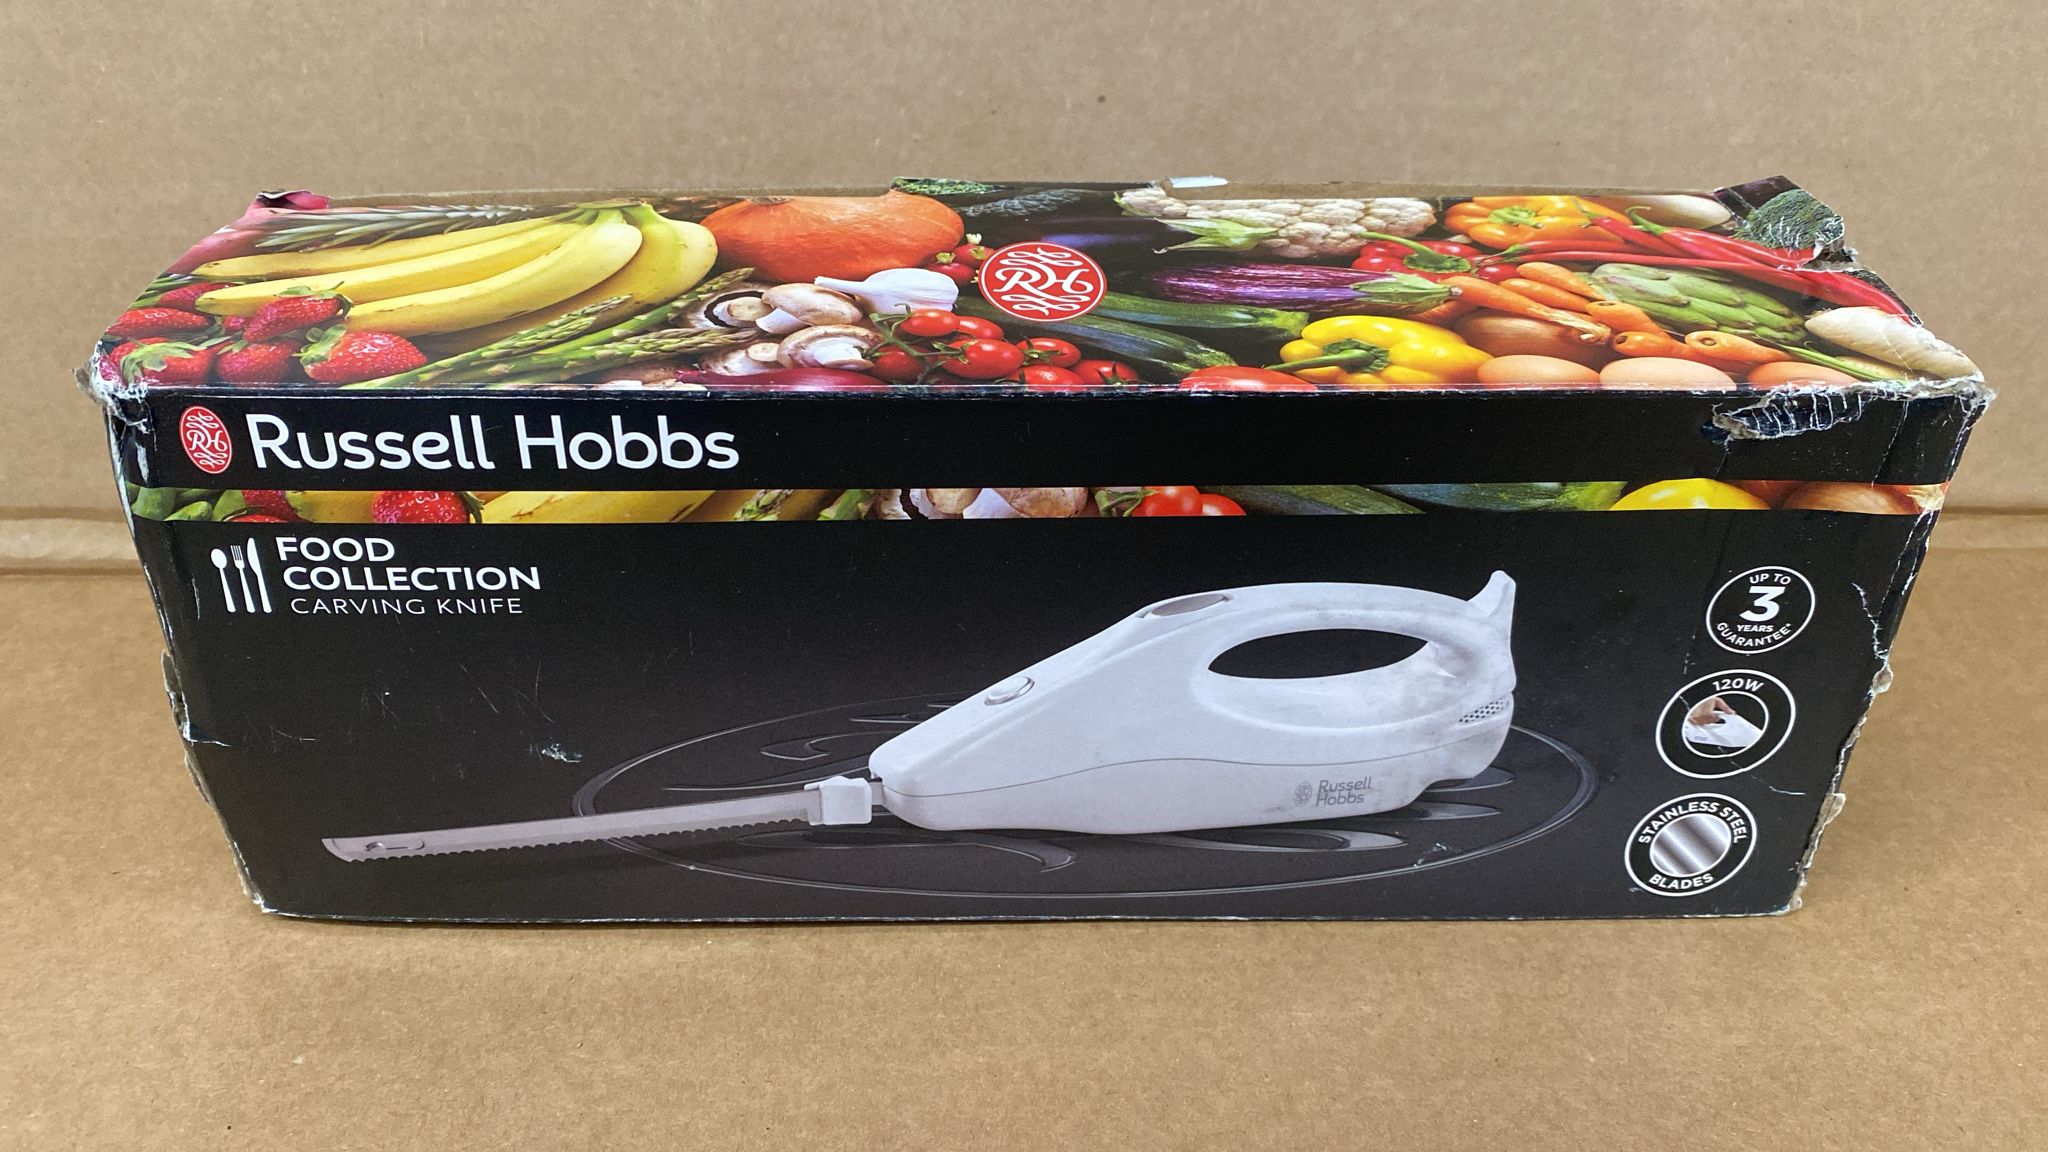 Russell Hobbs Electric Carving Knife Removable Blades White-5972no